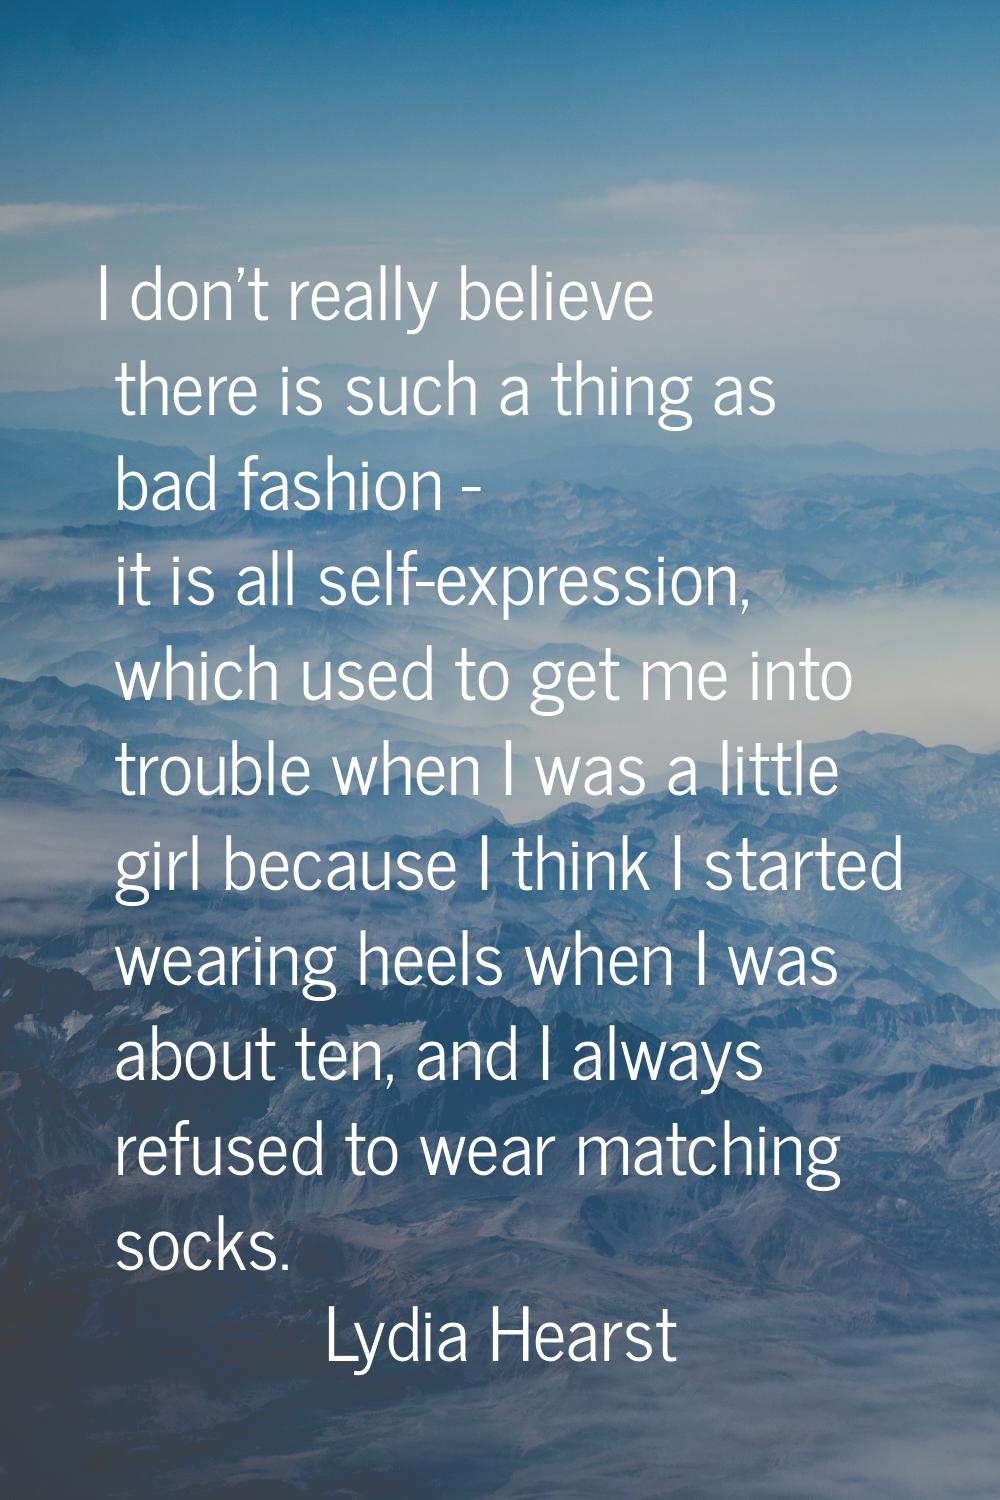 I don't really believe there is such a thing as bad fashion - it is all self-expression, which used